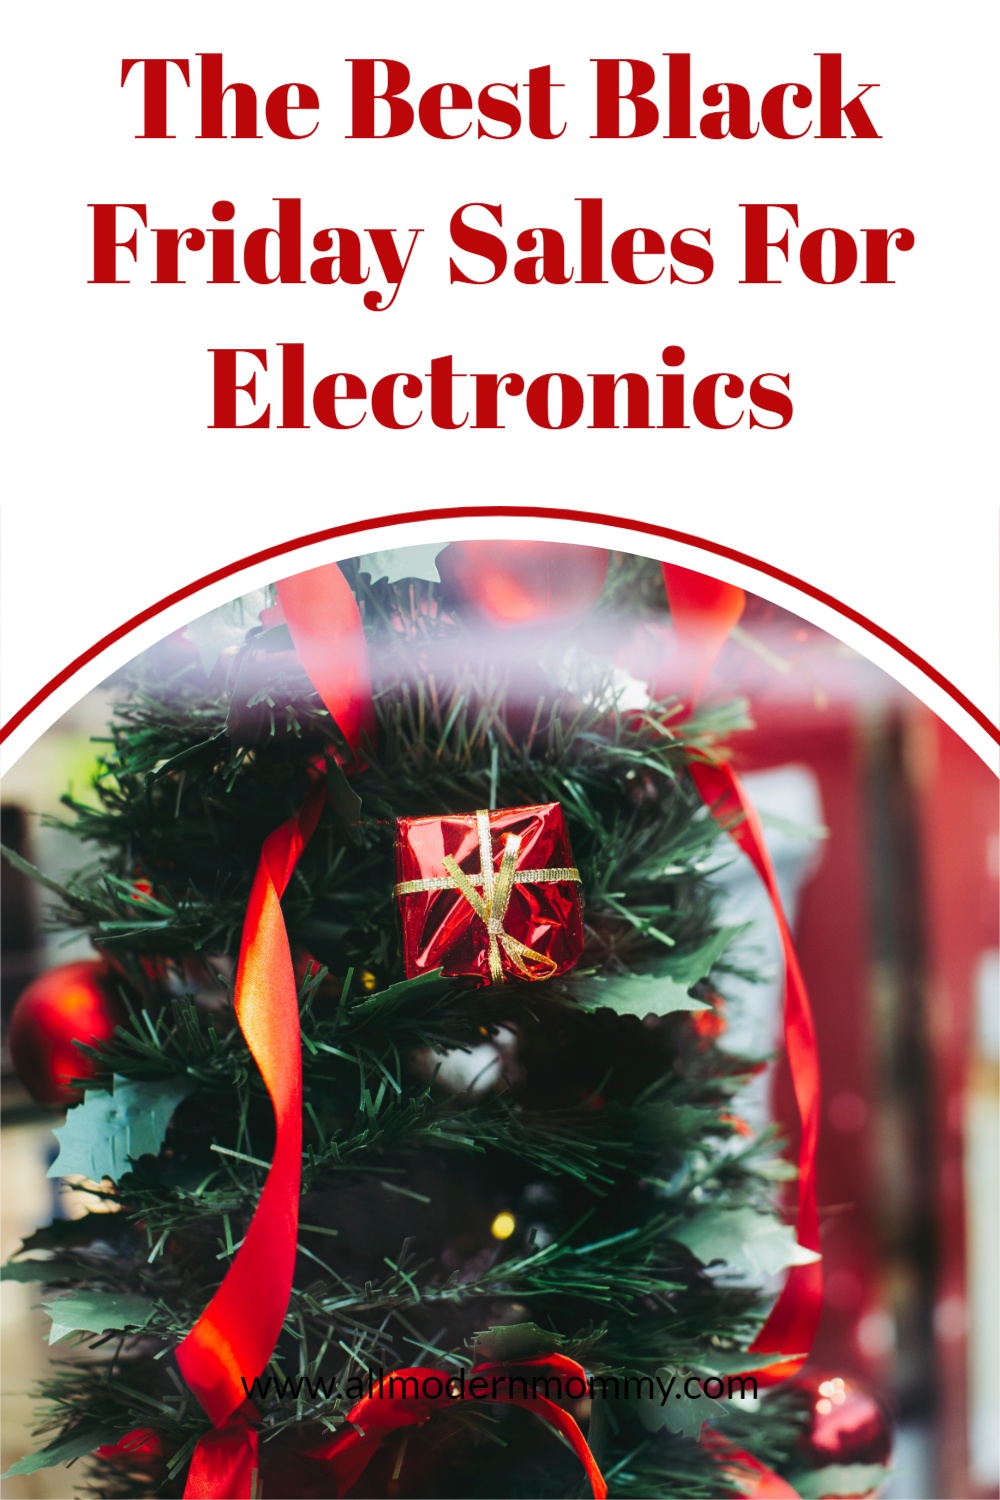 The Best Black Friday Sales For Electronics